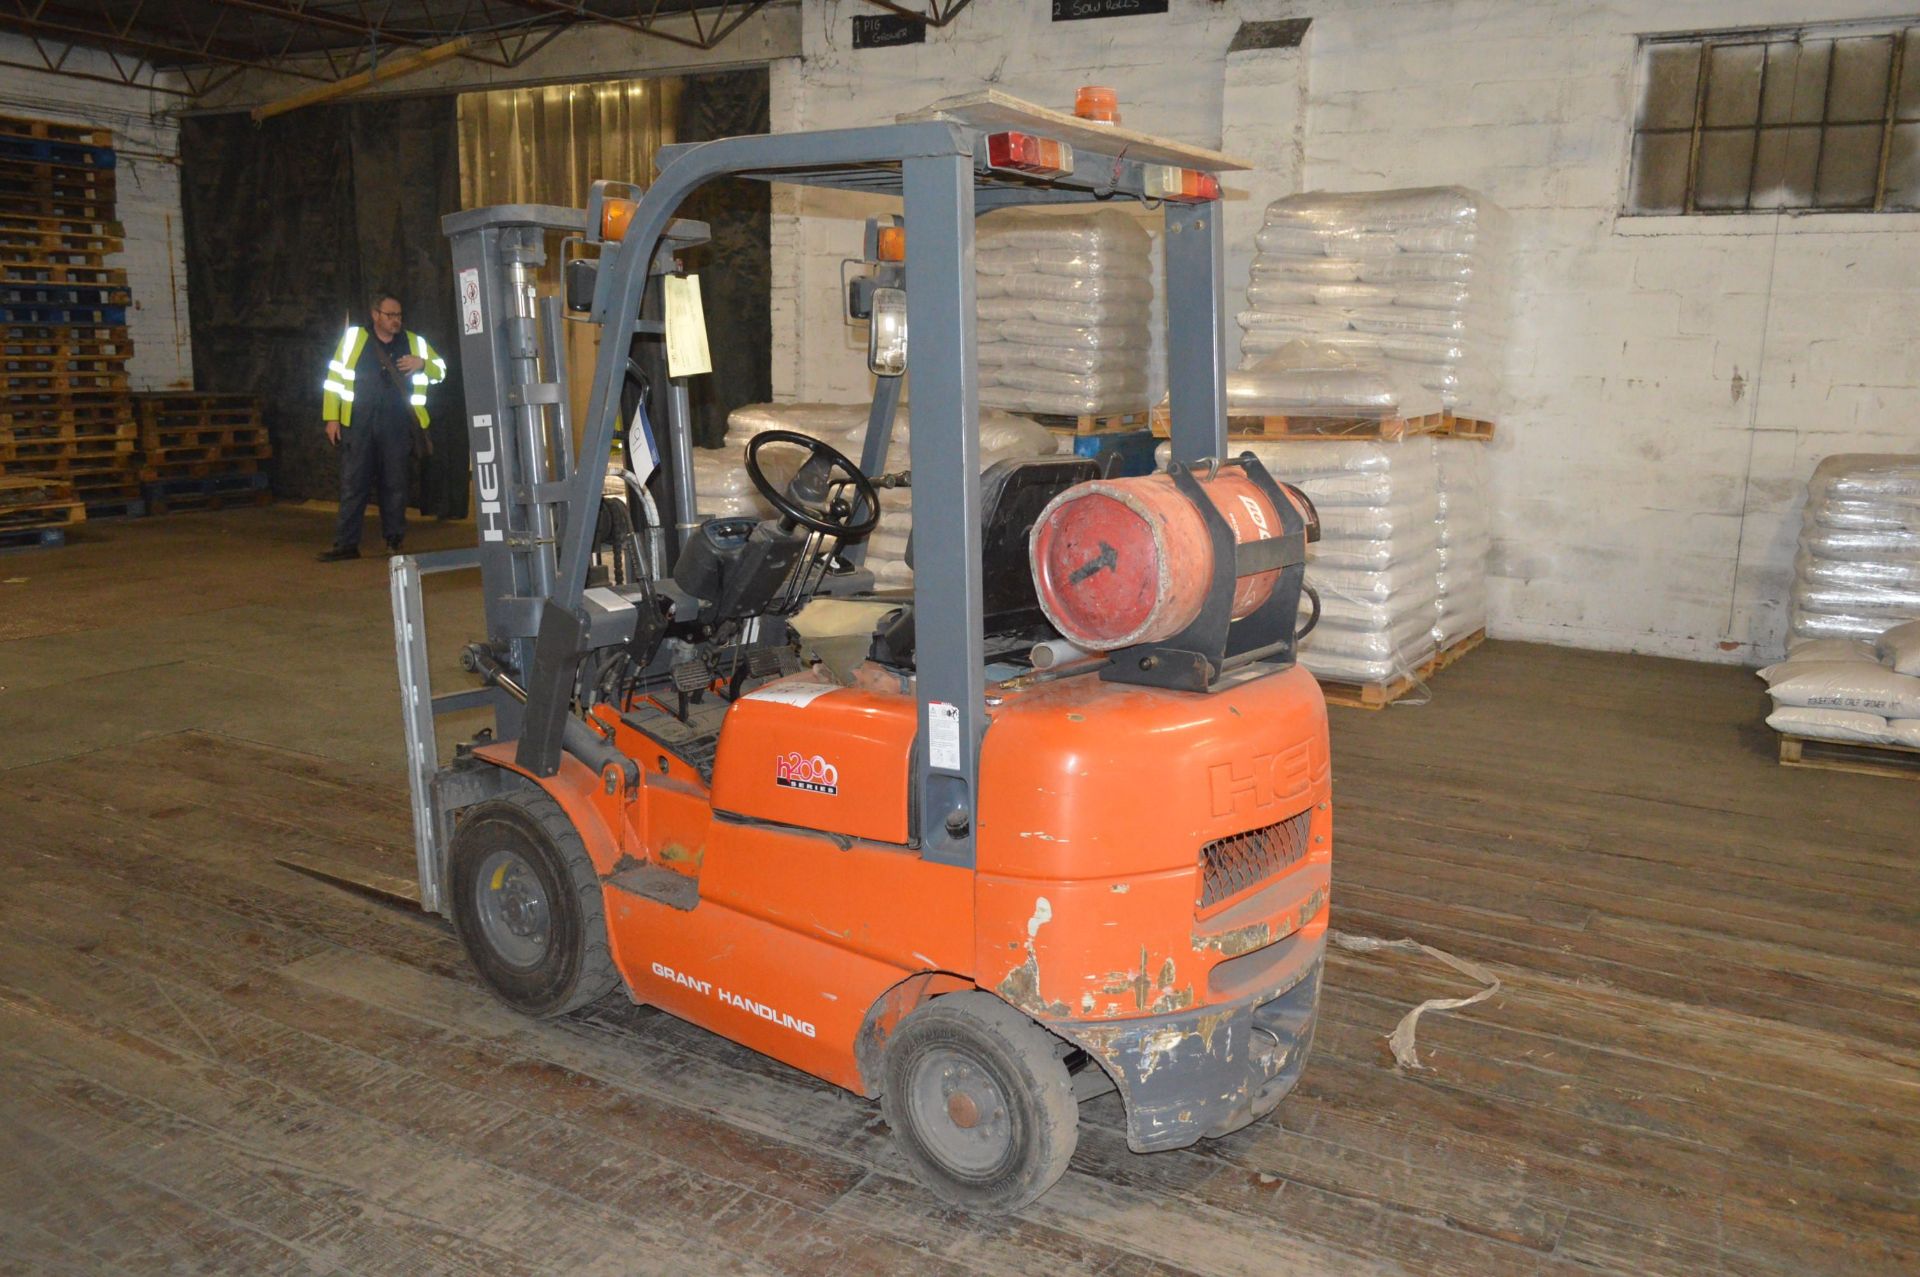 Heli HFG15 H2000 SERIES 1500kg LPG ENGINE FORK LIFT TRUCK, serial no. 78330, year of manufacture - Image 3 of 5